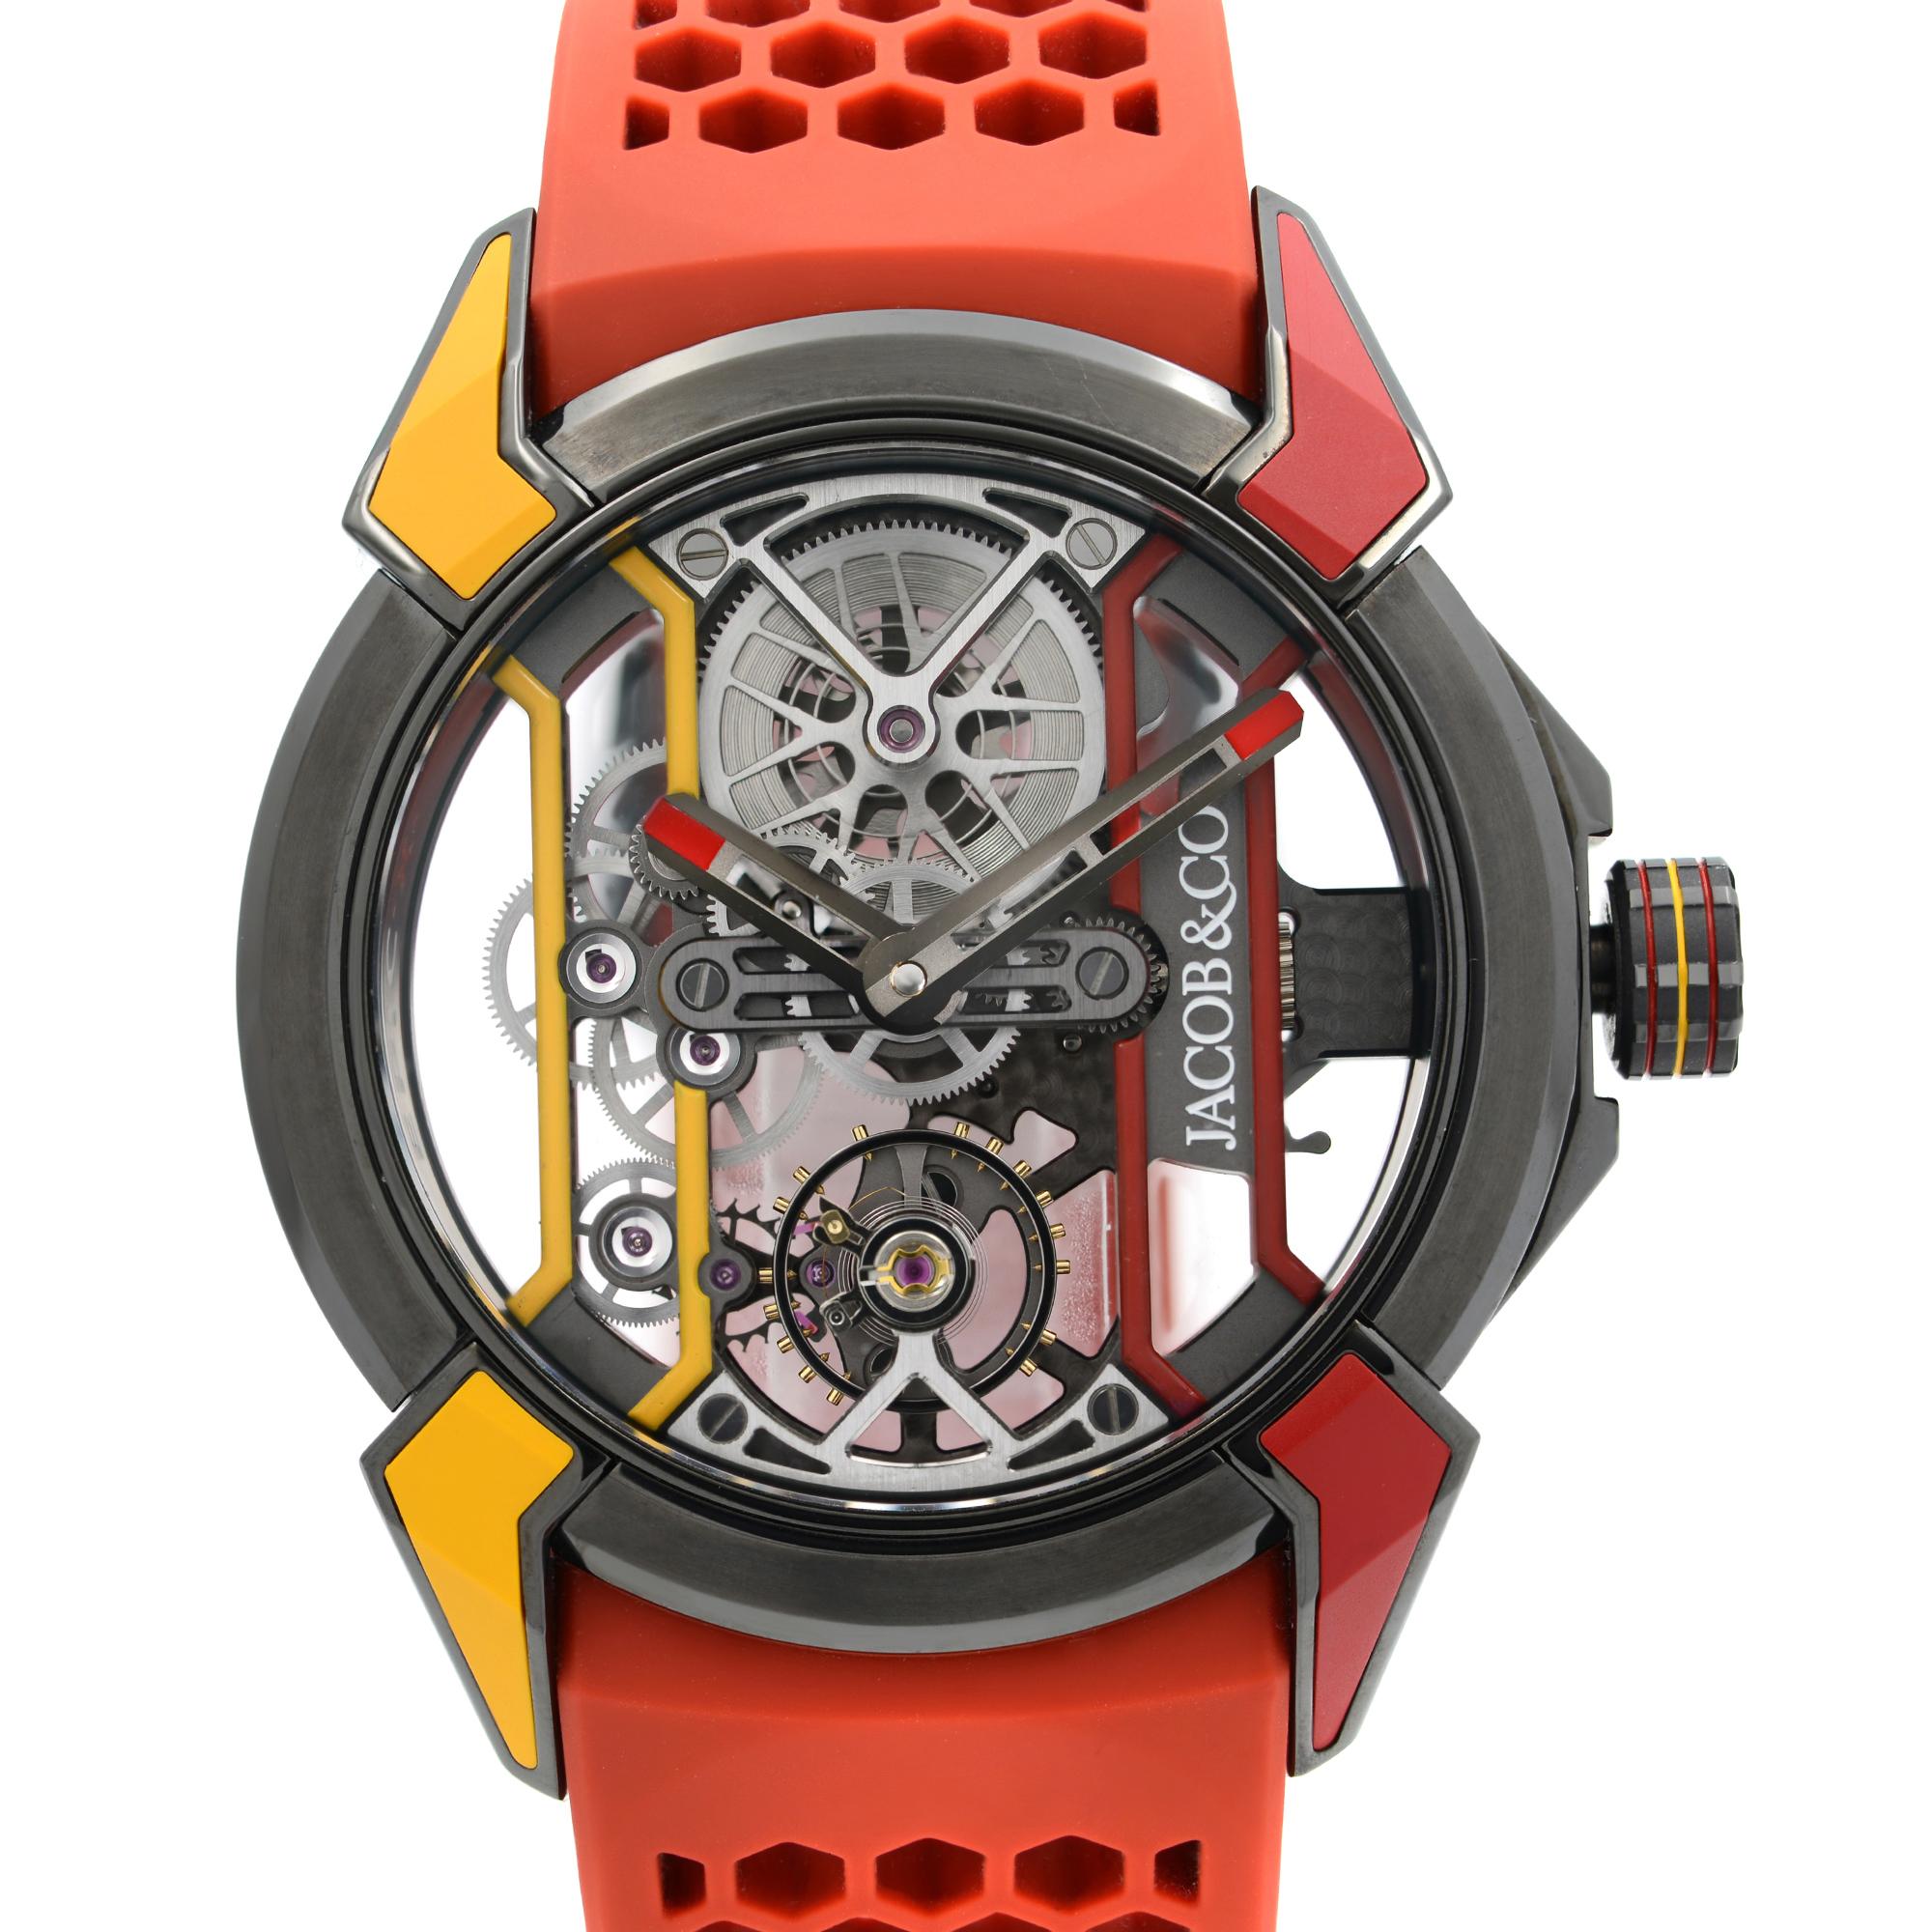 Unworn Jacob & Co Epic X Titanium Skeleton Dial Hand-Wind Men's Watch EX100.21.CR.CB.ALD4A This Beautiful Timepiece is Powered by Mechanical (Manual) Movement And Features: Round Black, Orange, & Red Titanium Case with a Red Rubber Honeycomb Buckle